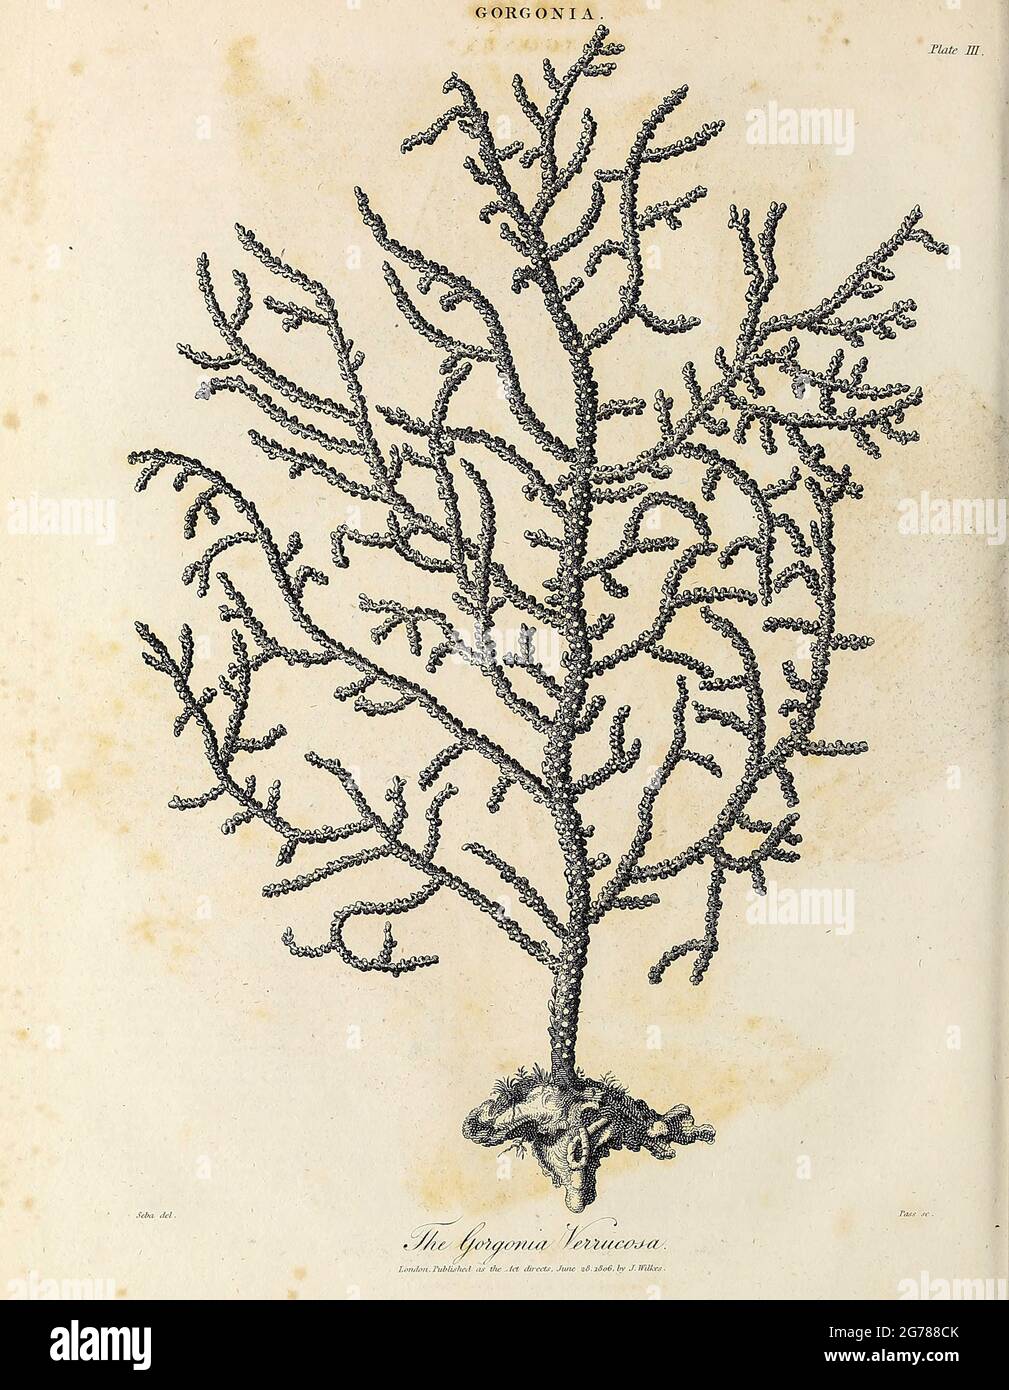 Gorgonia is a genus of soft corals, sea fans in the family Gorgoniidae. Copperplate engraving From the Encyclopaedia Londinensis or, Universal dictionary of arts, sciences, and literature; Volume VIII;  Edited by Wilkes, John. Published in London in 1810. Stock Photo